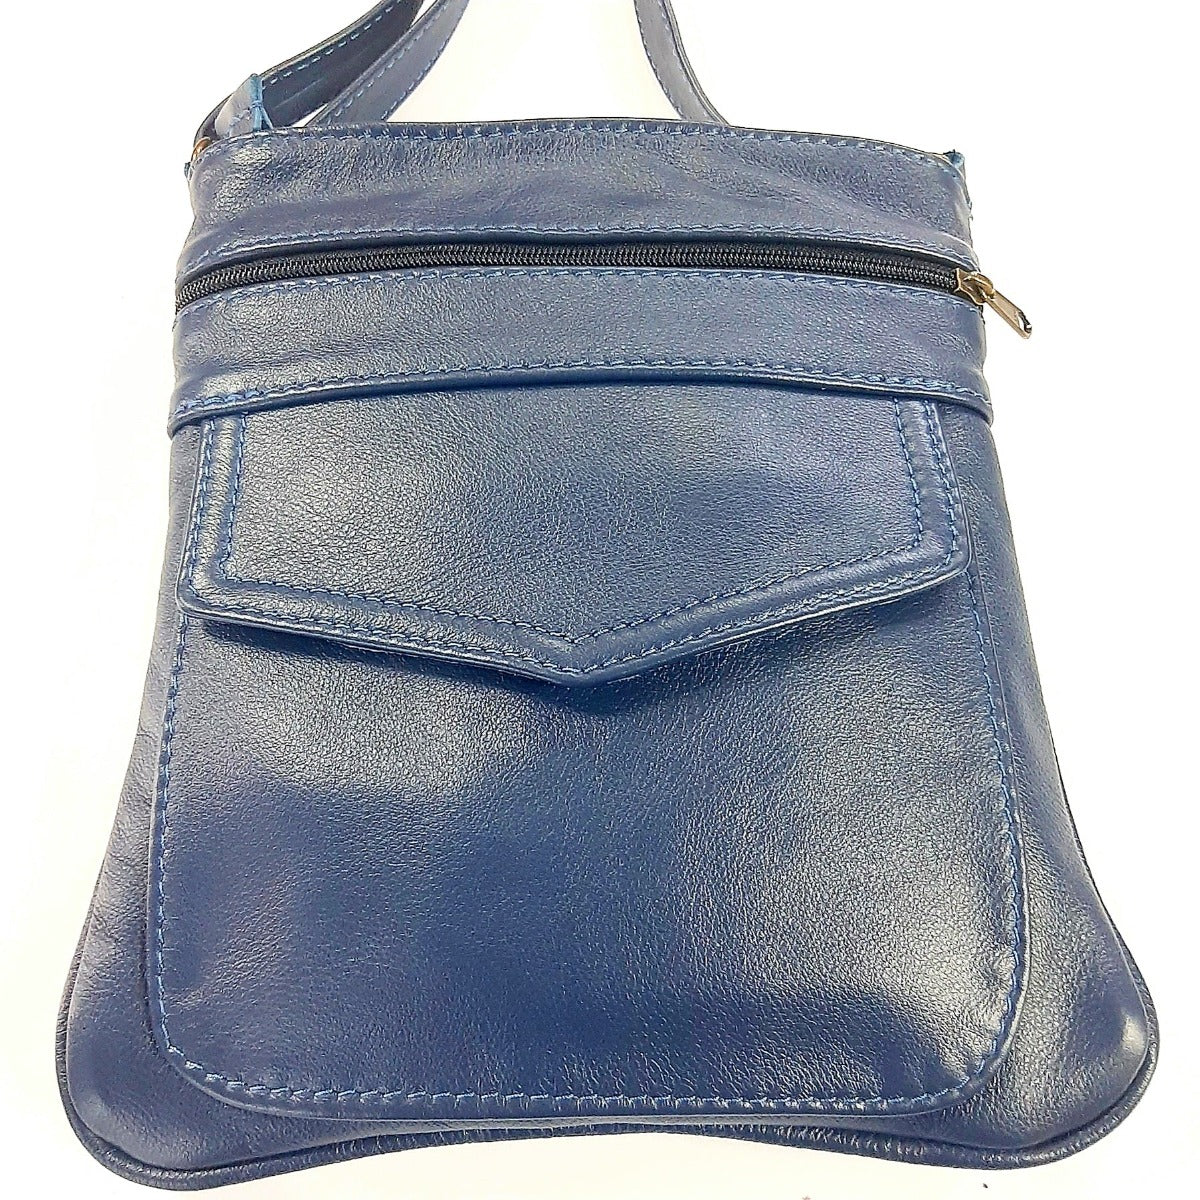 Leony Sling leather Bags